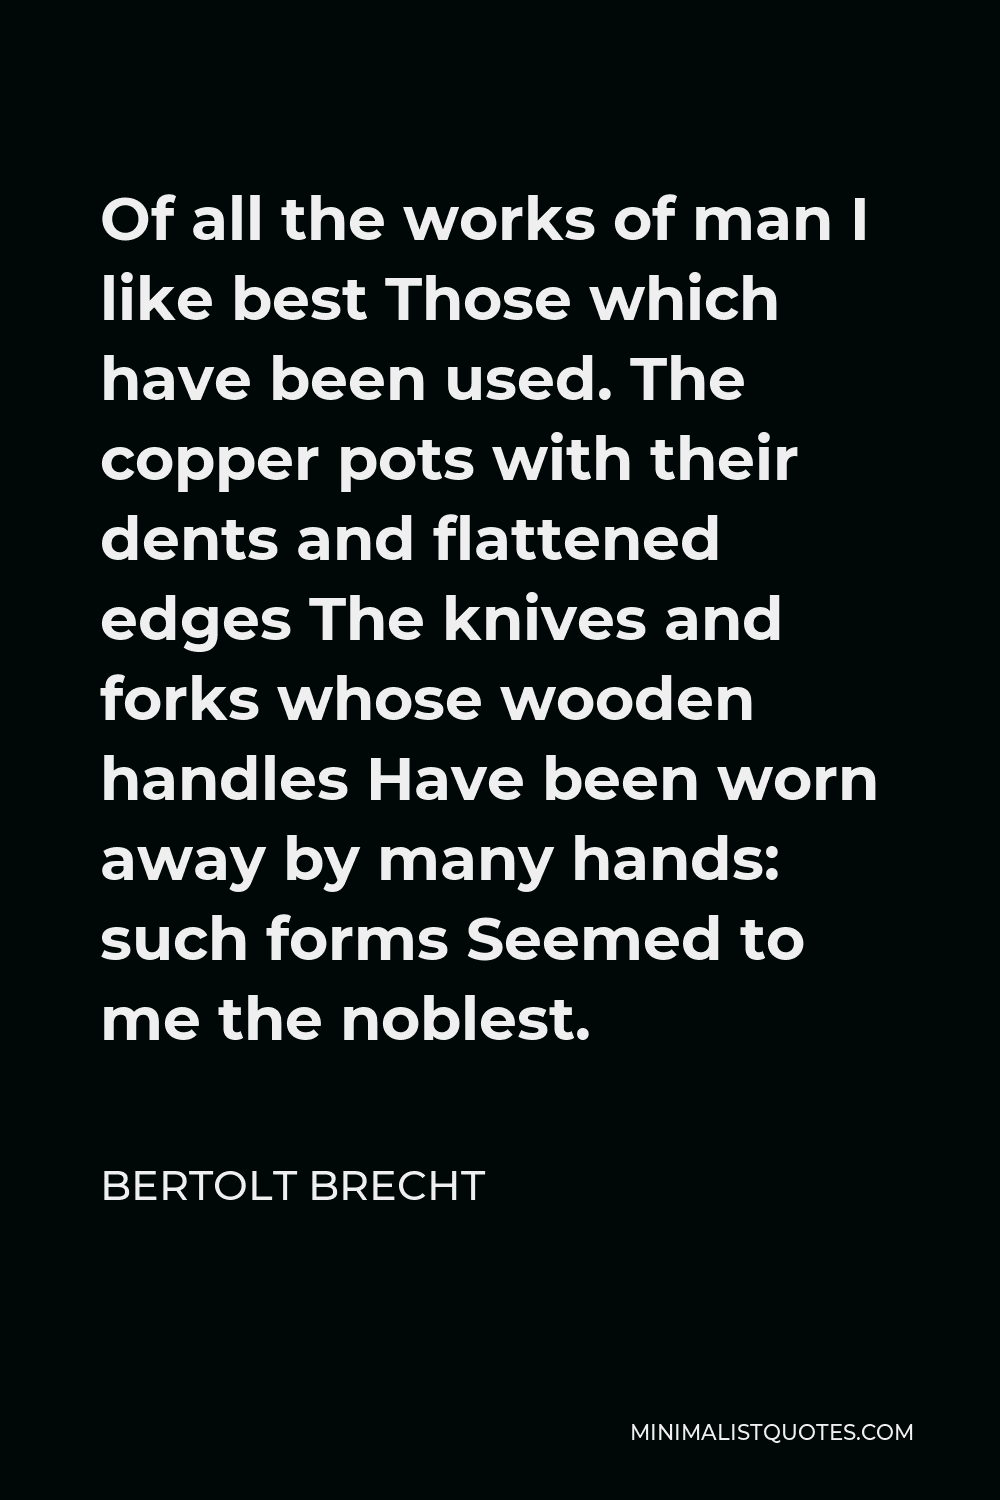 Bertolt Brecht Quote - Of all the works of man I like best Those which have been used. The copper pots with their dents and flattened edges The knives and forks whose wooden handles Have been worn away by many hands: such forms Seemed to me the noblest.